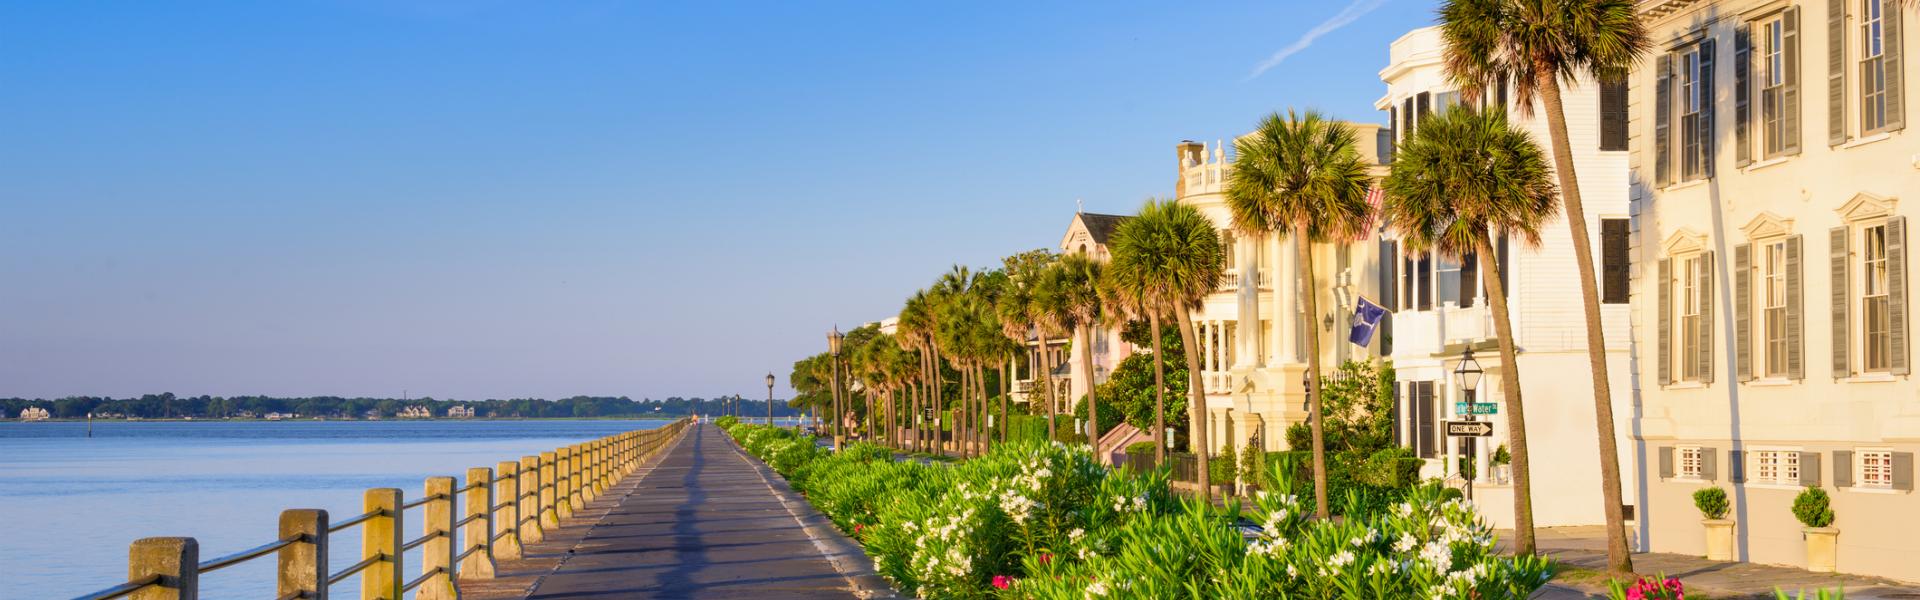 Find the perfect vacation home in South Carolina - Casamundo